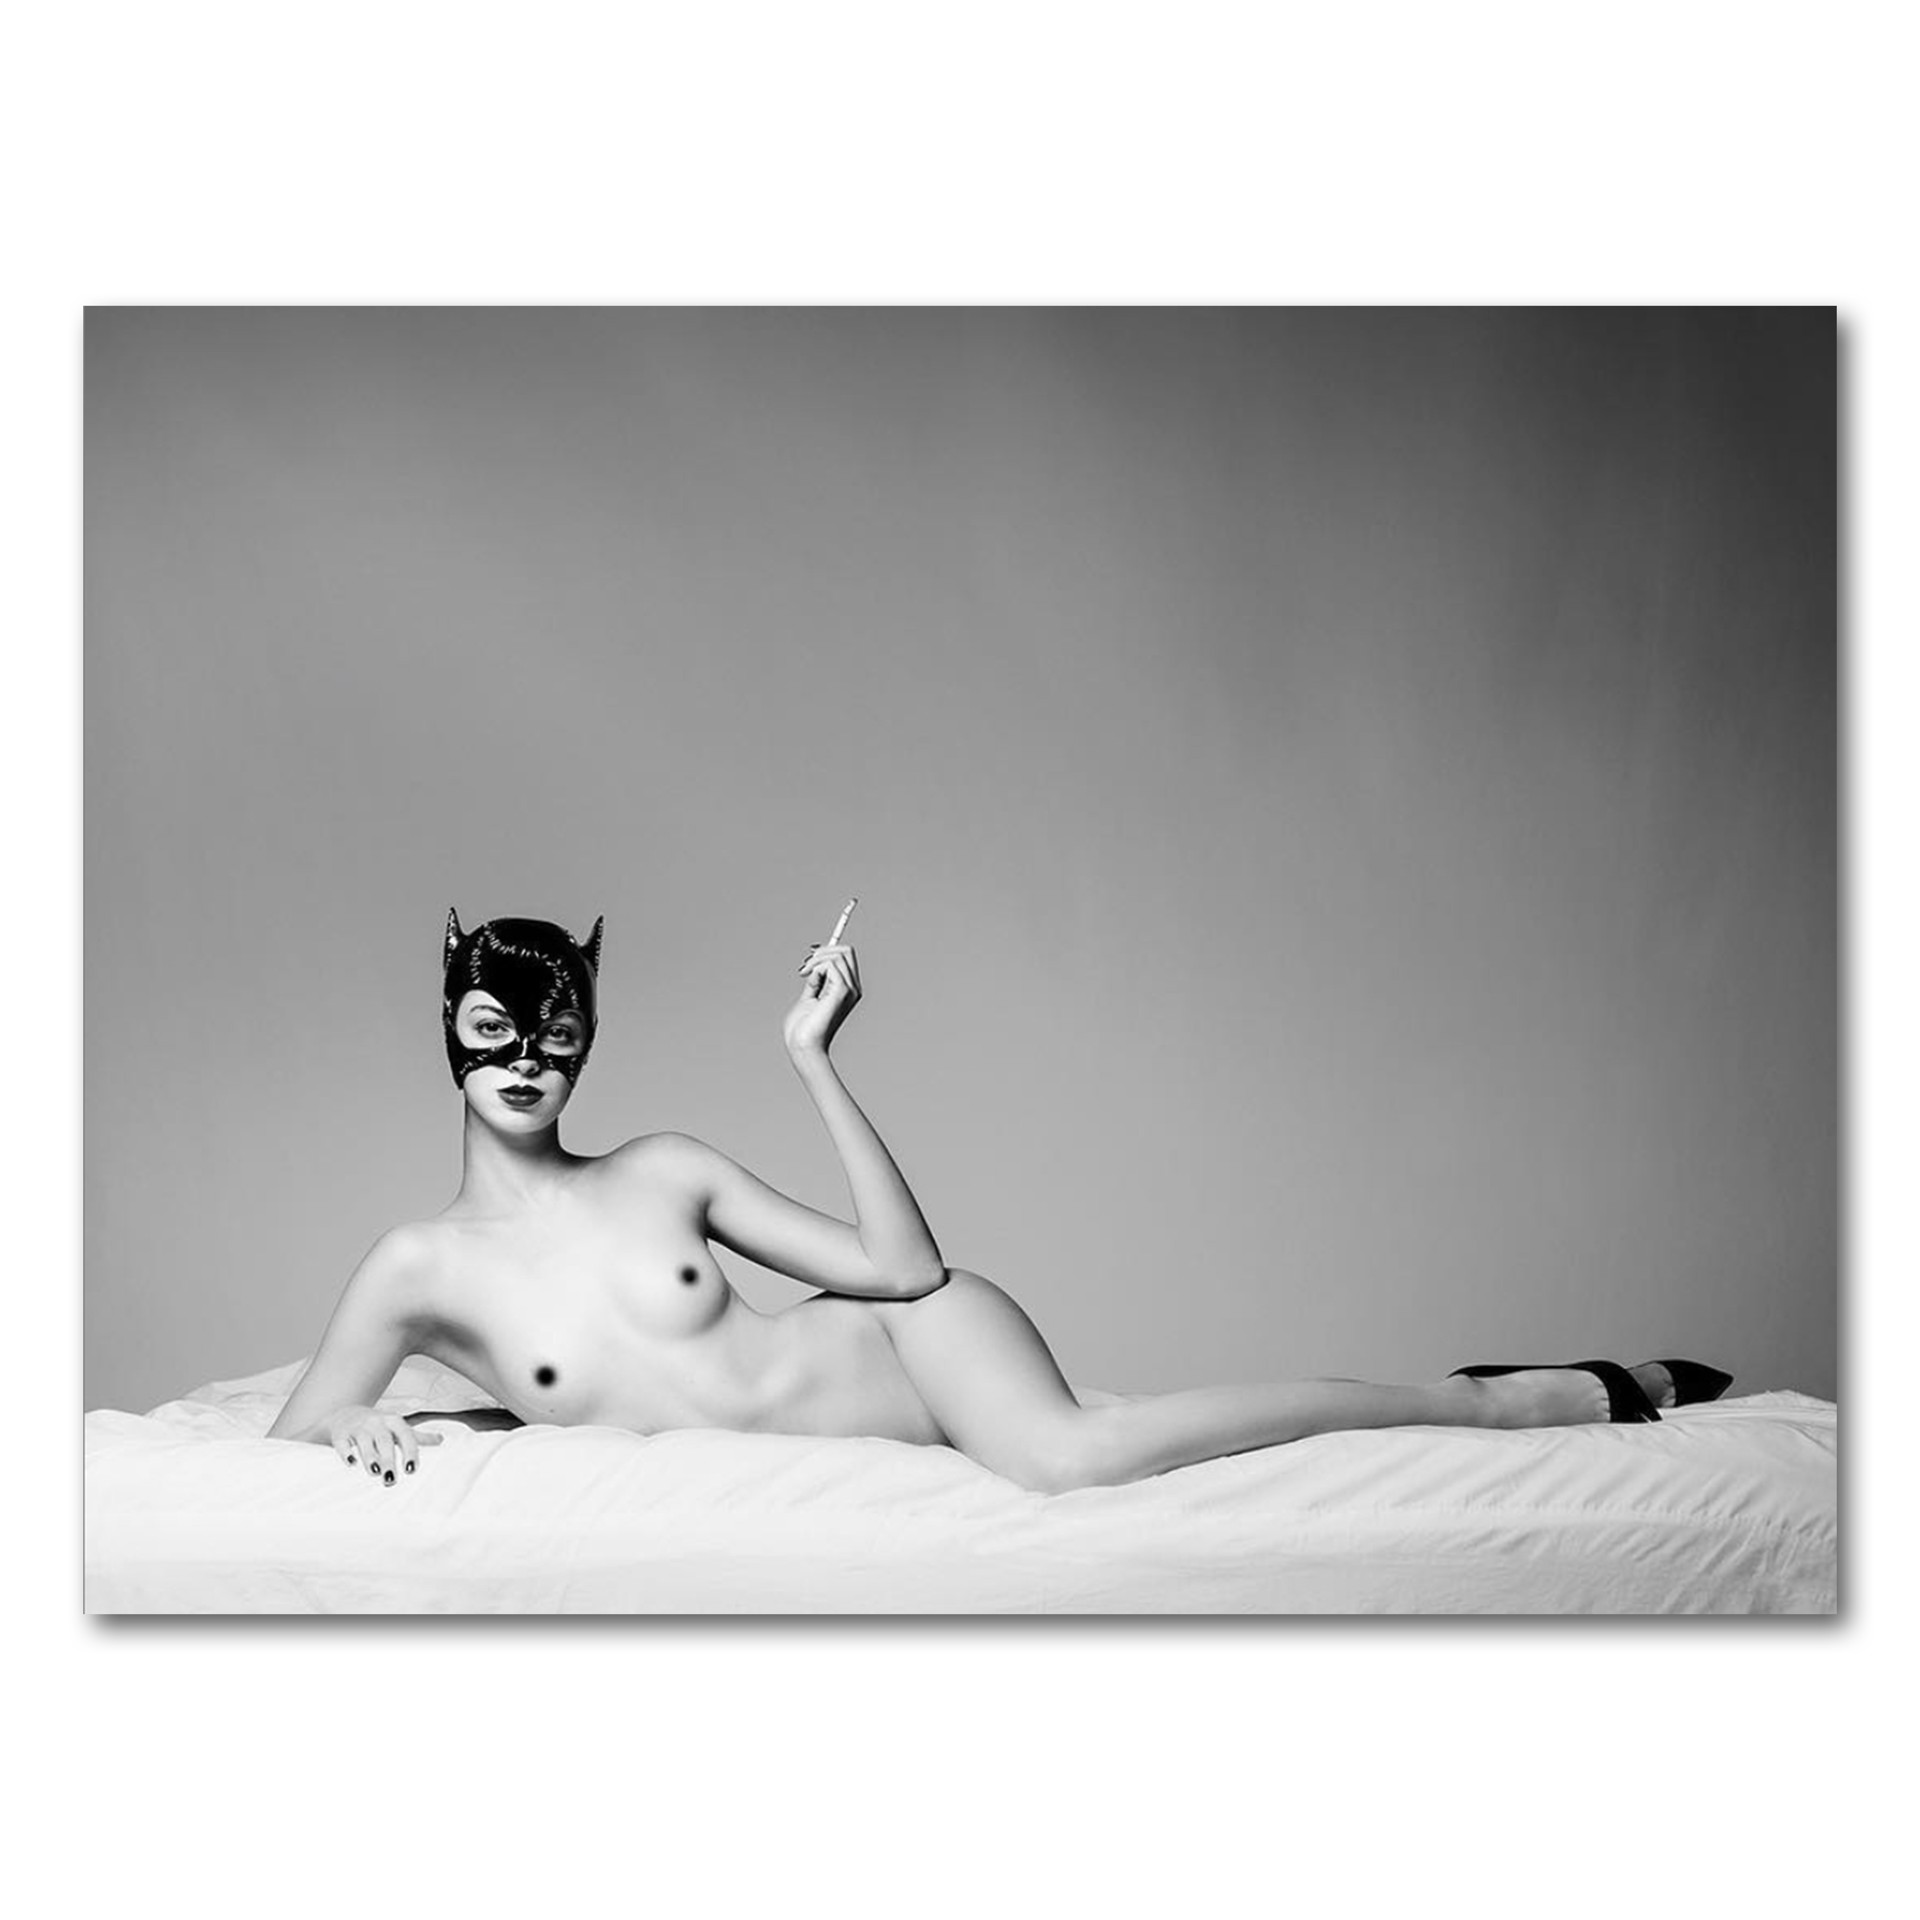 Catwoman by Tyler Shields